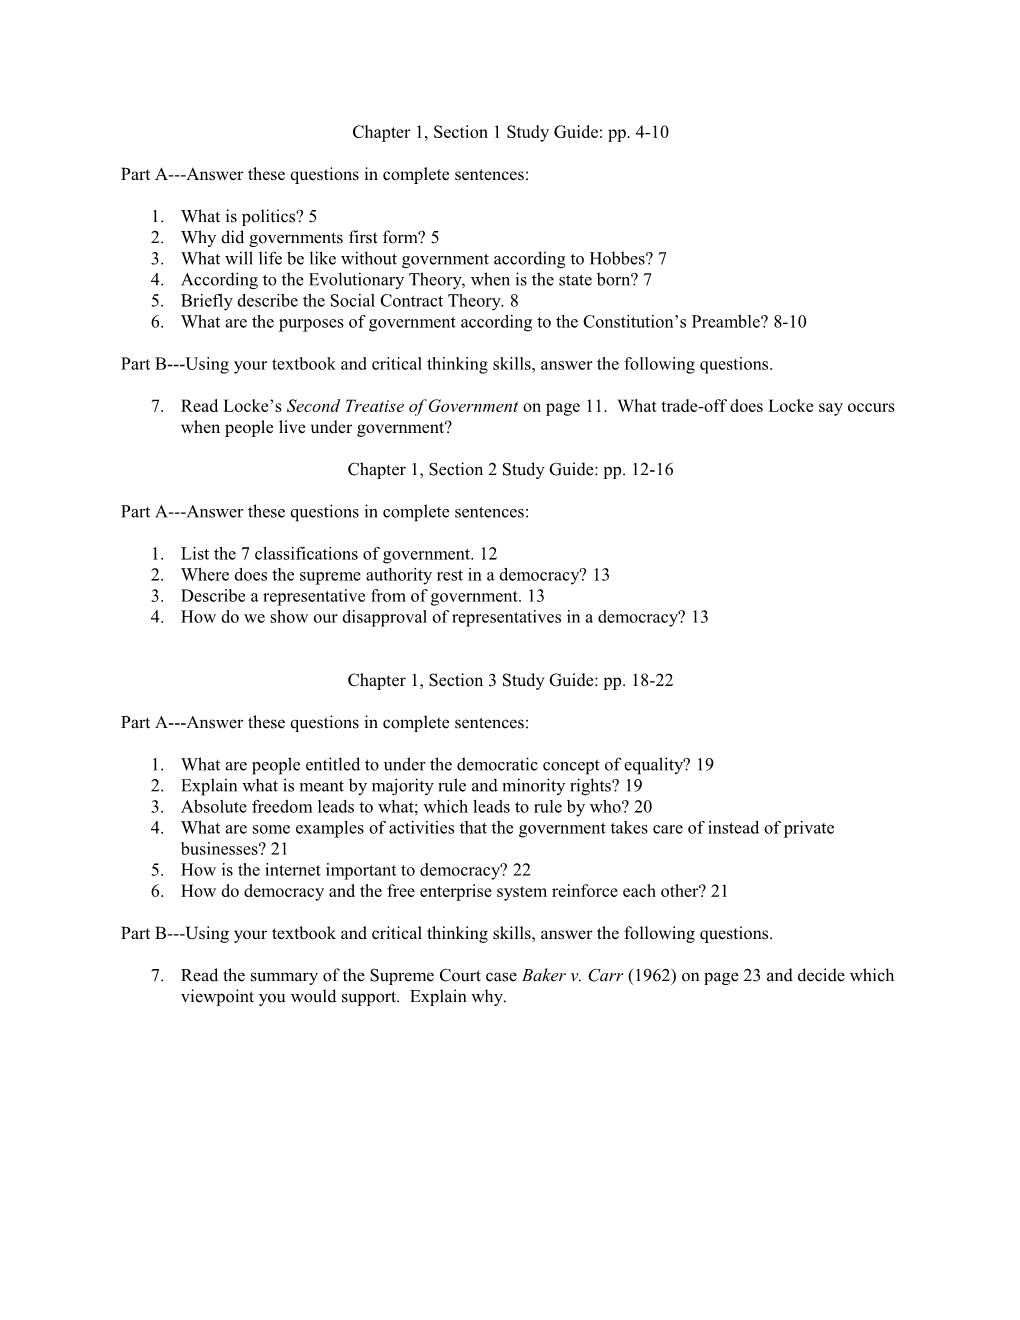 Chapter 1, Section 1 Study Guide: Pp